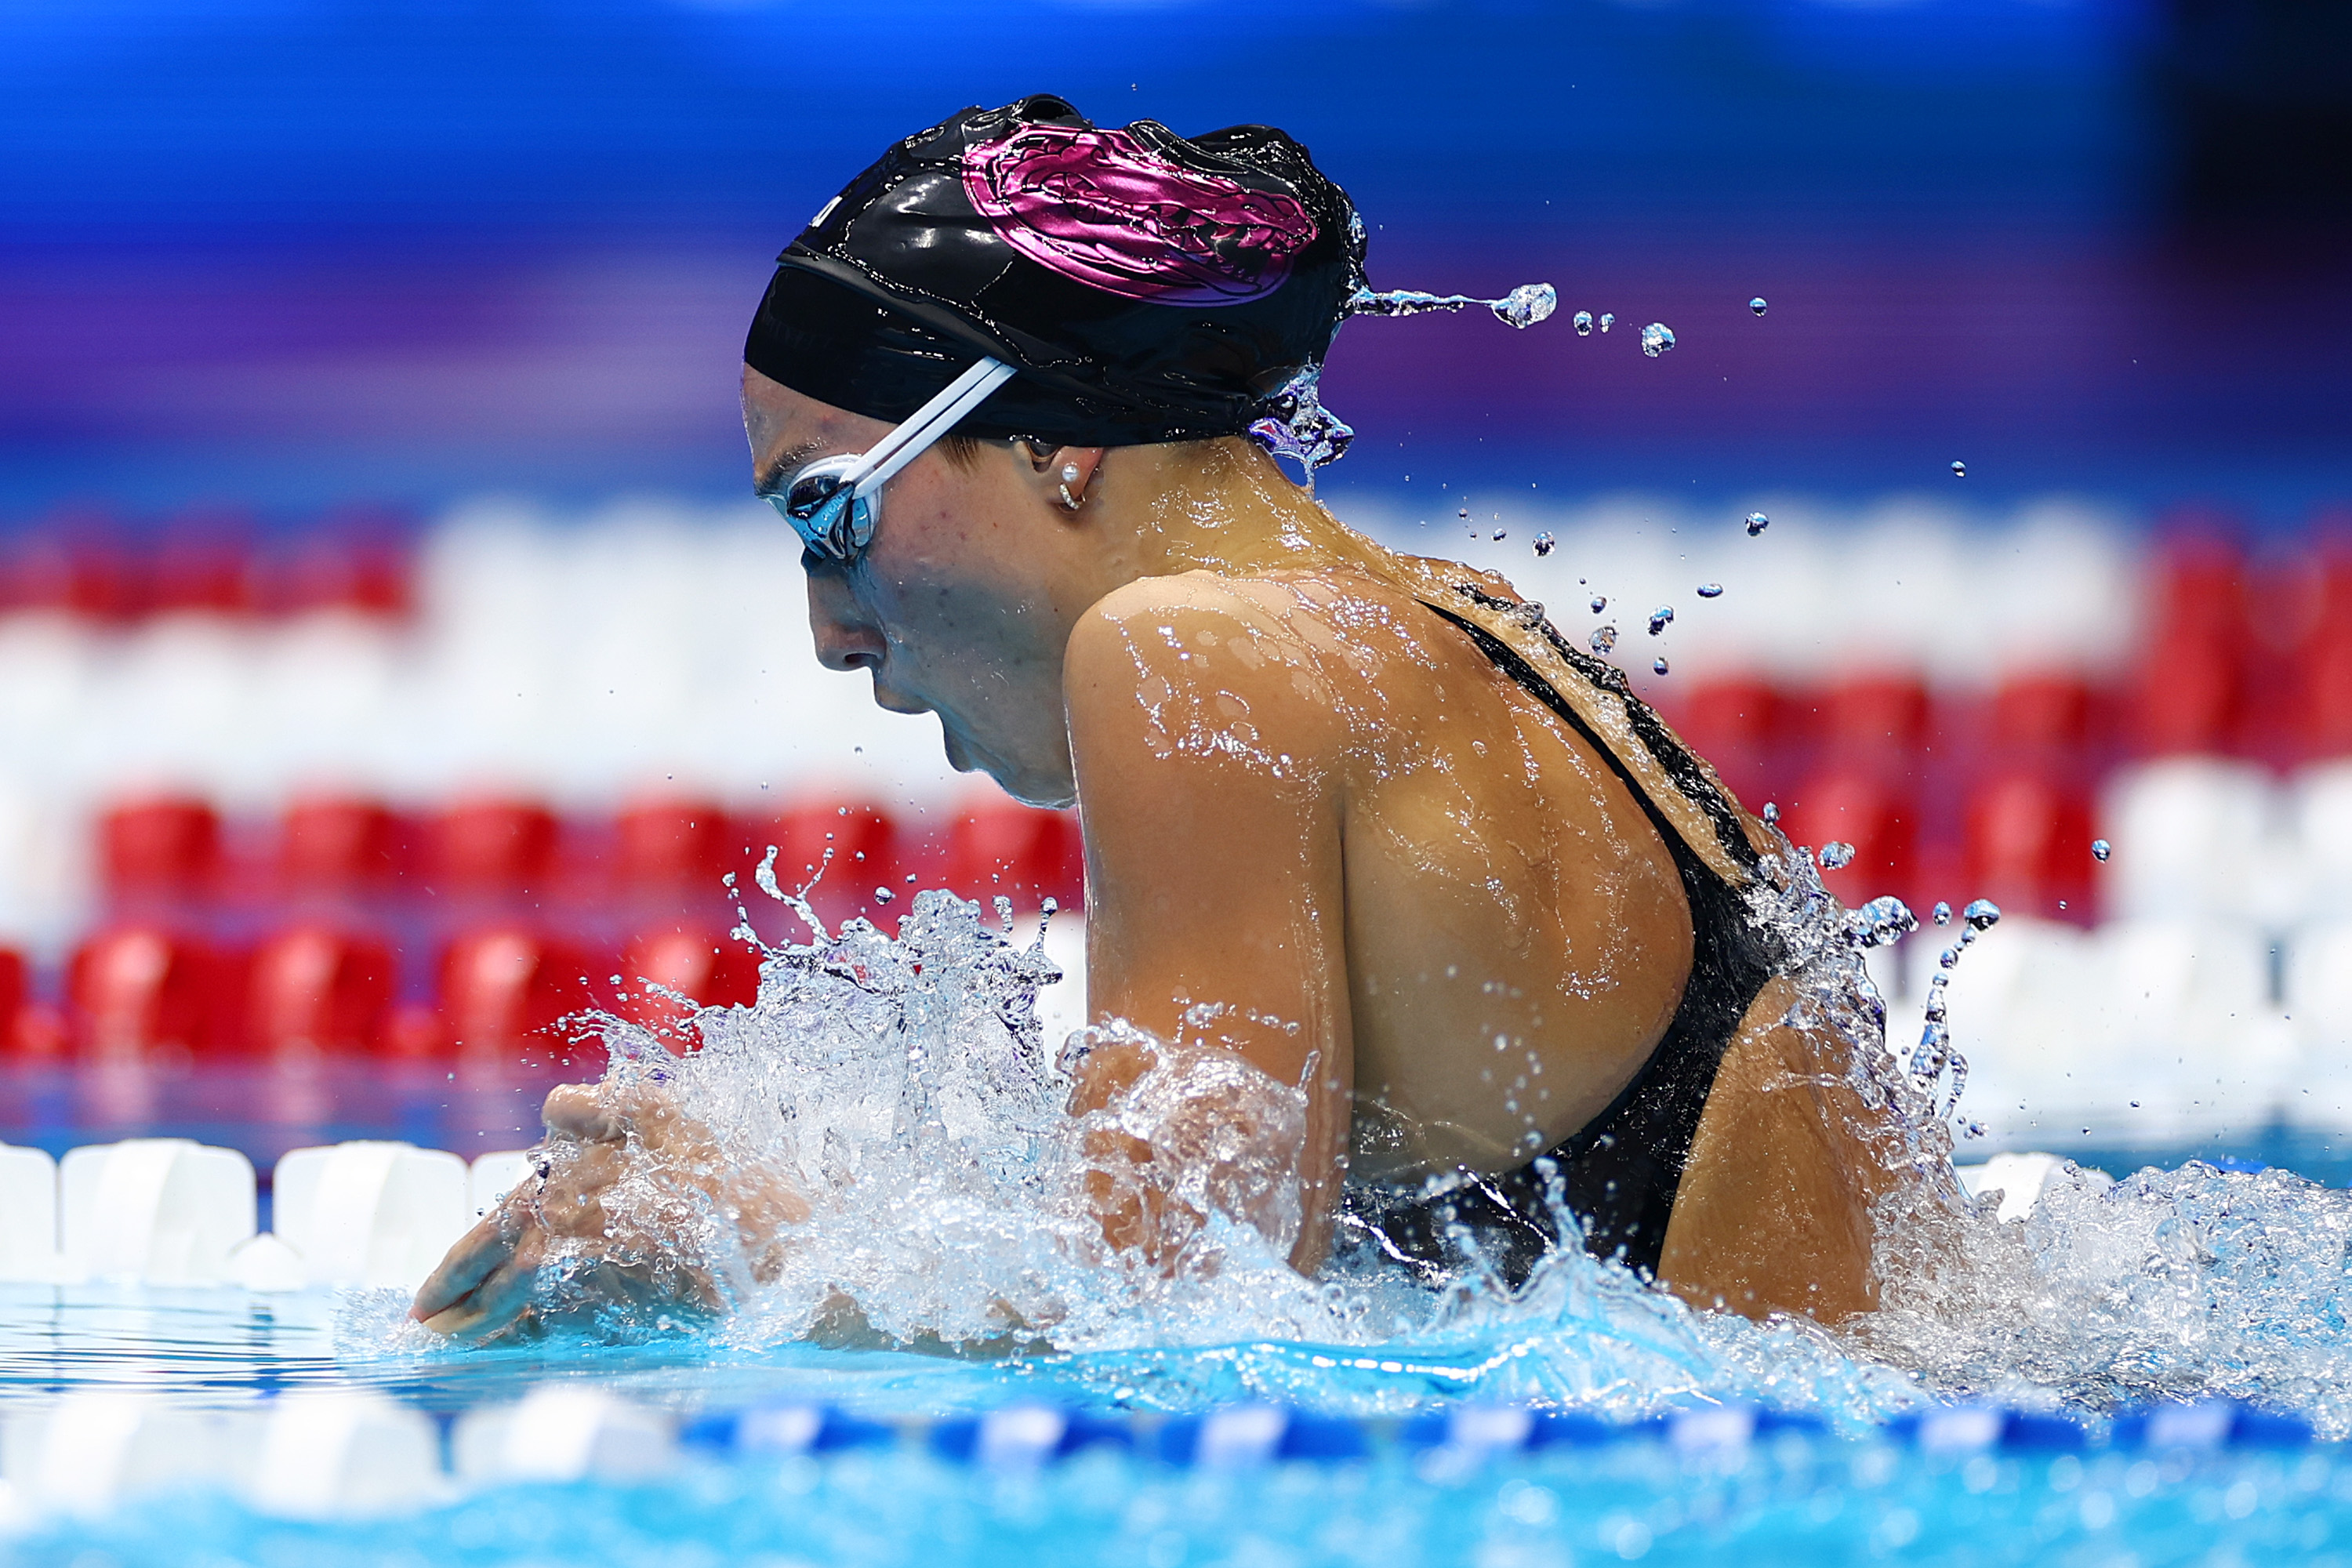 UF rising senior Emma Weyant will compete in the 400m individual medley in the 2024 Olympics after earning a silver medal in the event at the 2020 games. (Photo by Sarah Stier/Getty Images)